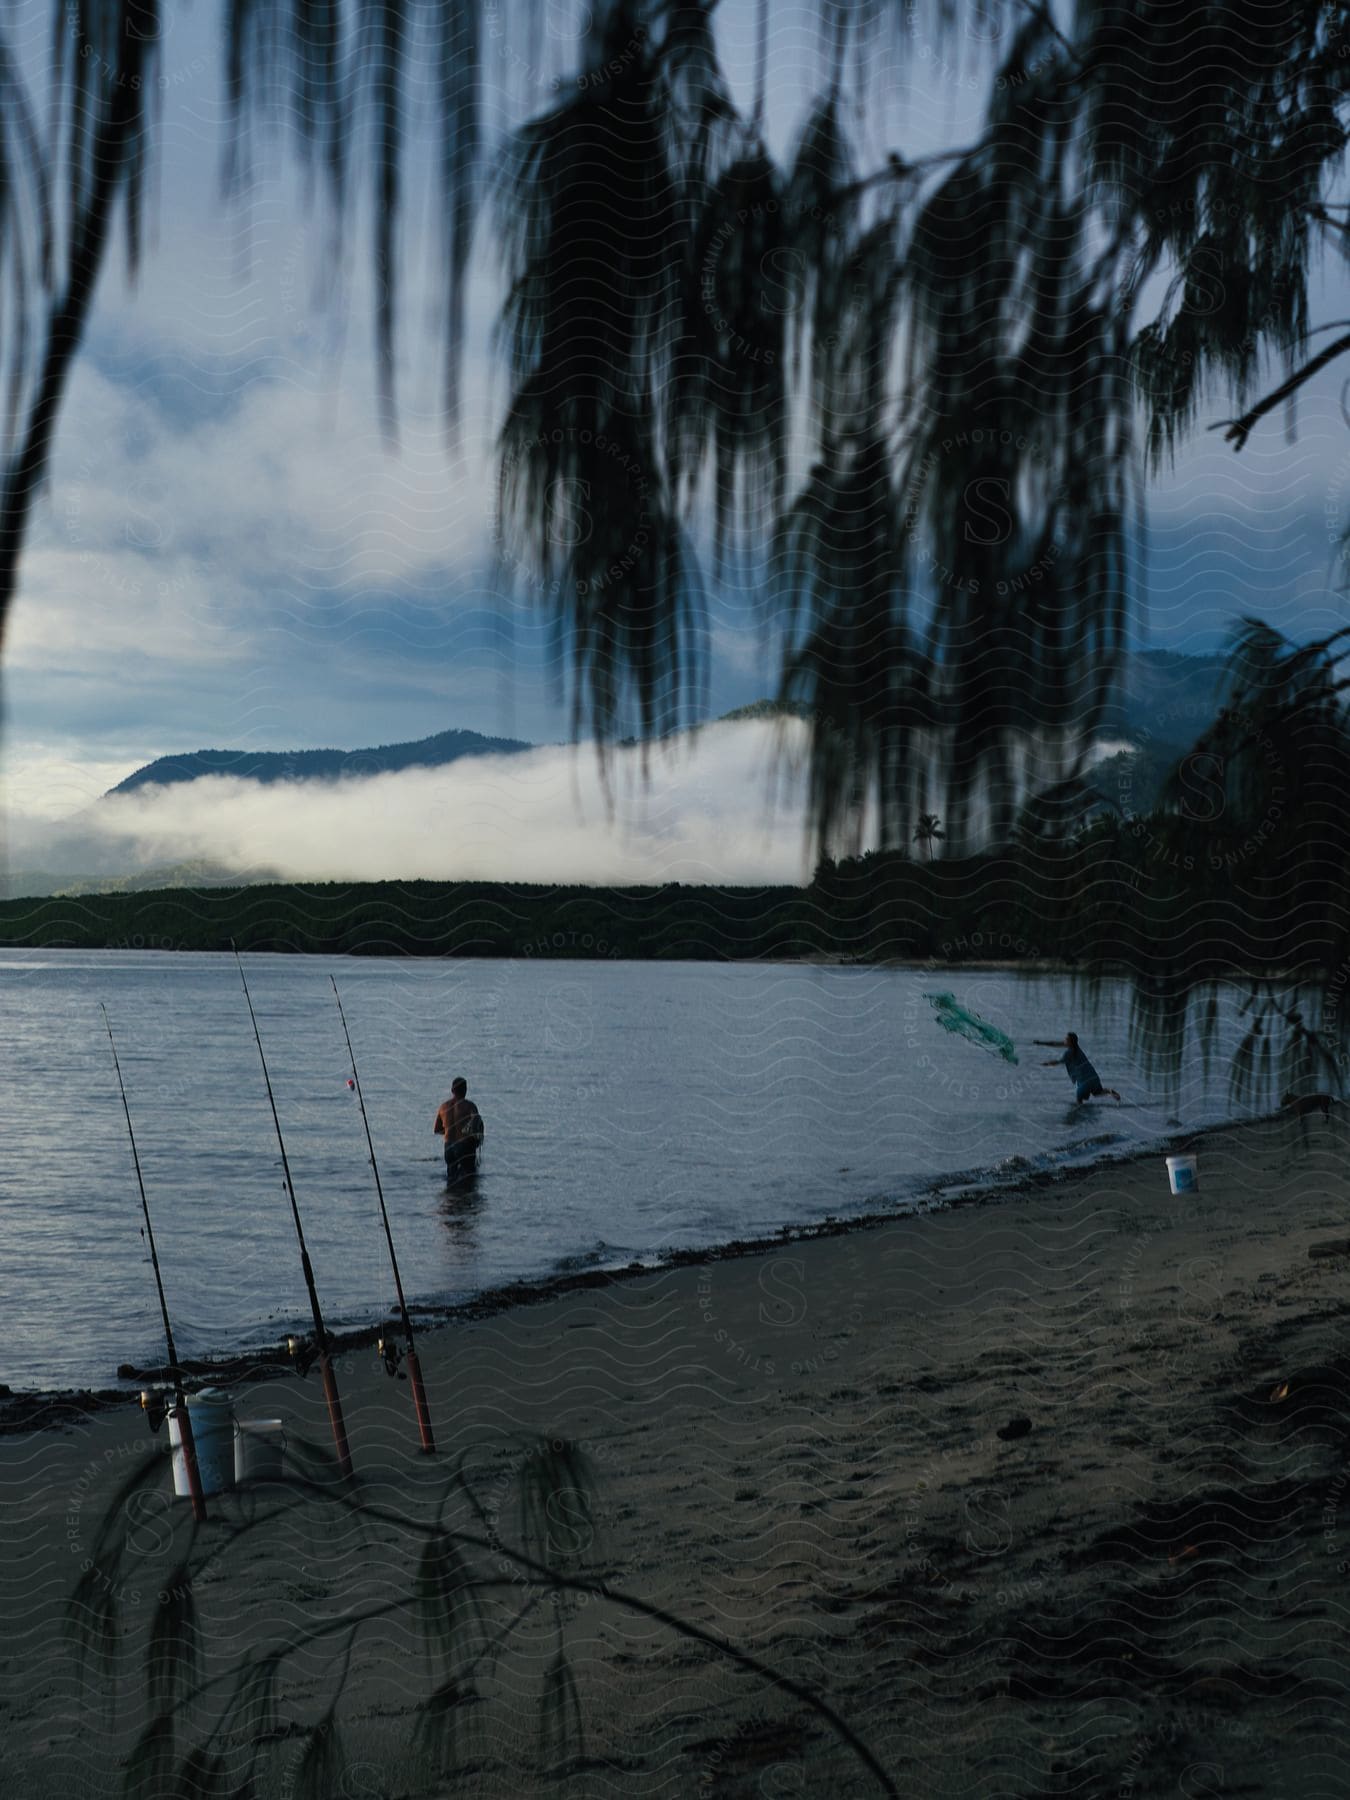 Landscape of a beach with mountains around and fishing rods with two fishermen by the sea on a cloudy morning.